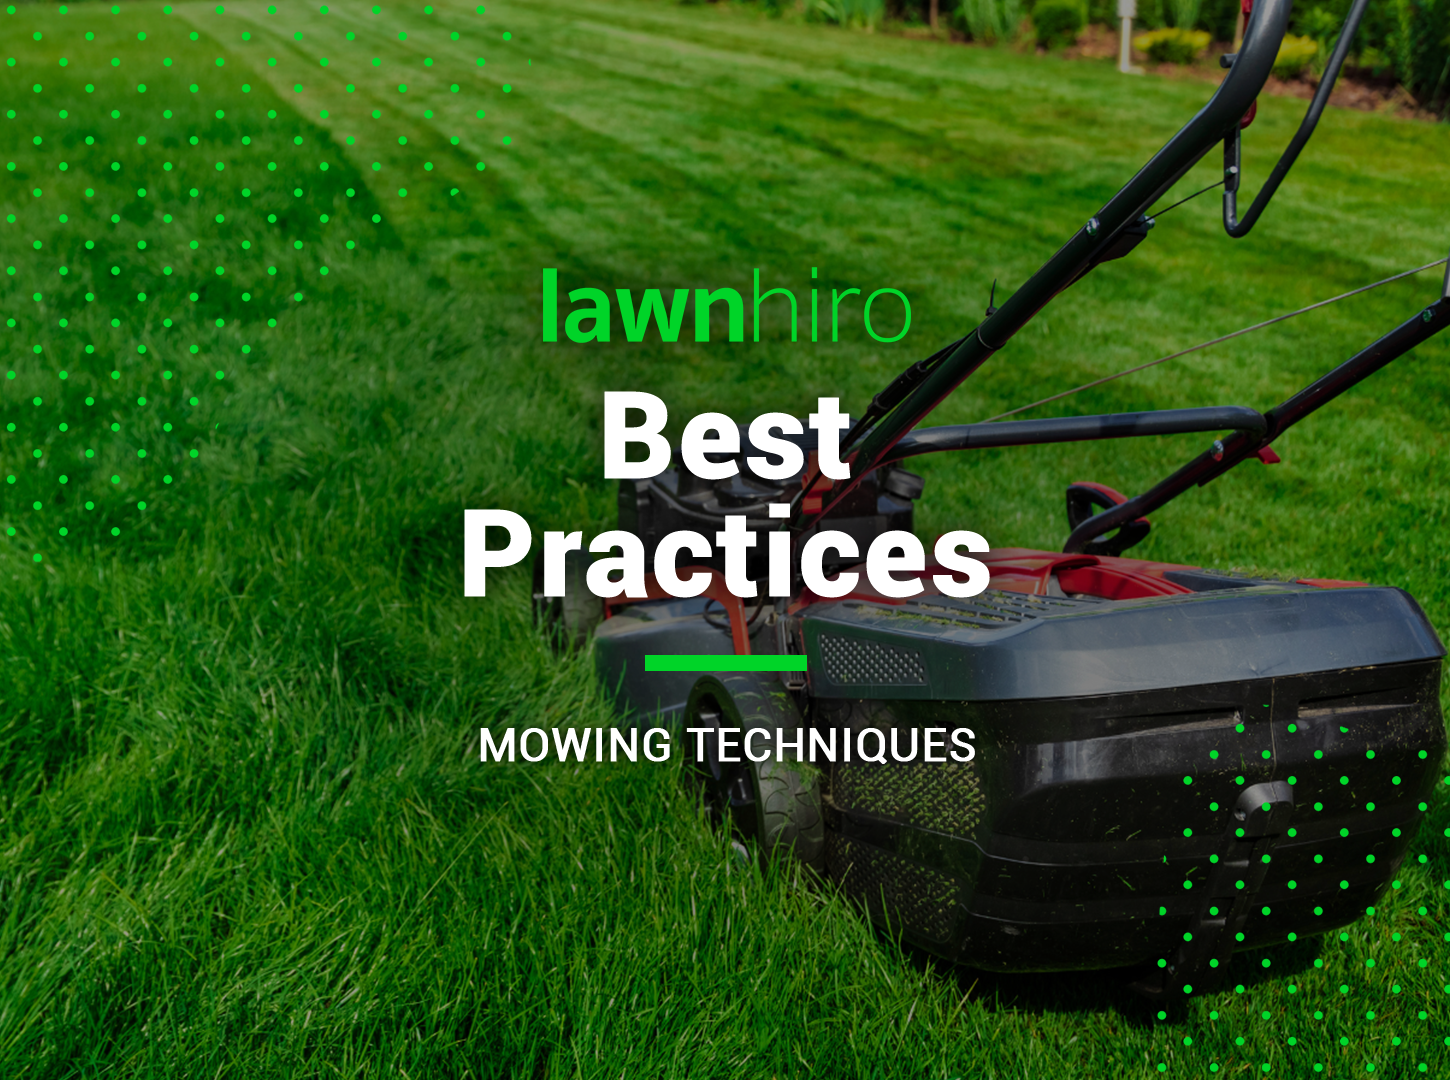 Best Practices for Mowing - Lawnhiro